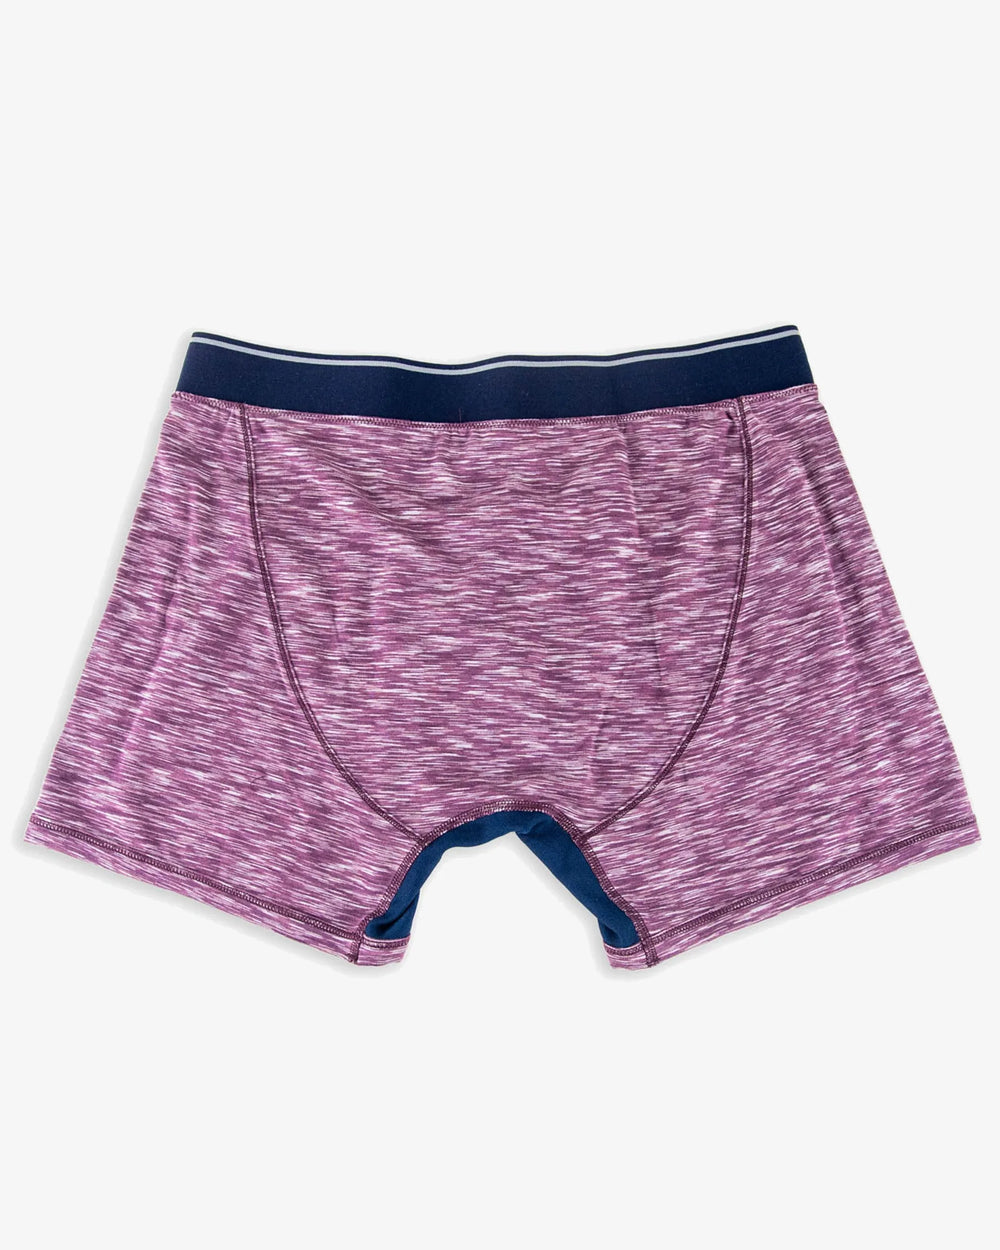 The back view of the Southern Tide Baxter Performance Boxer Brief by Southern Tide - Plum Wine